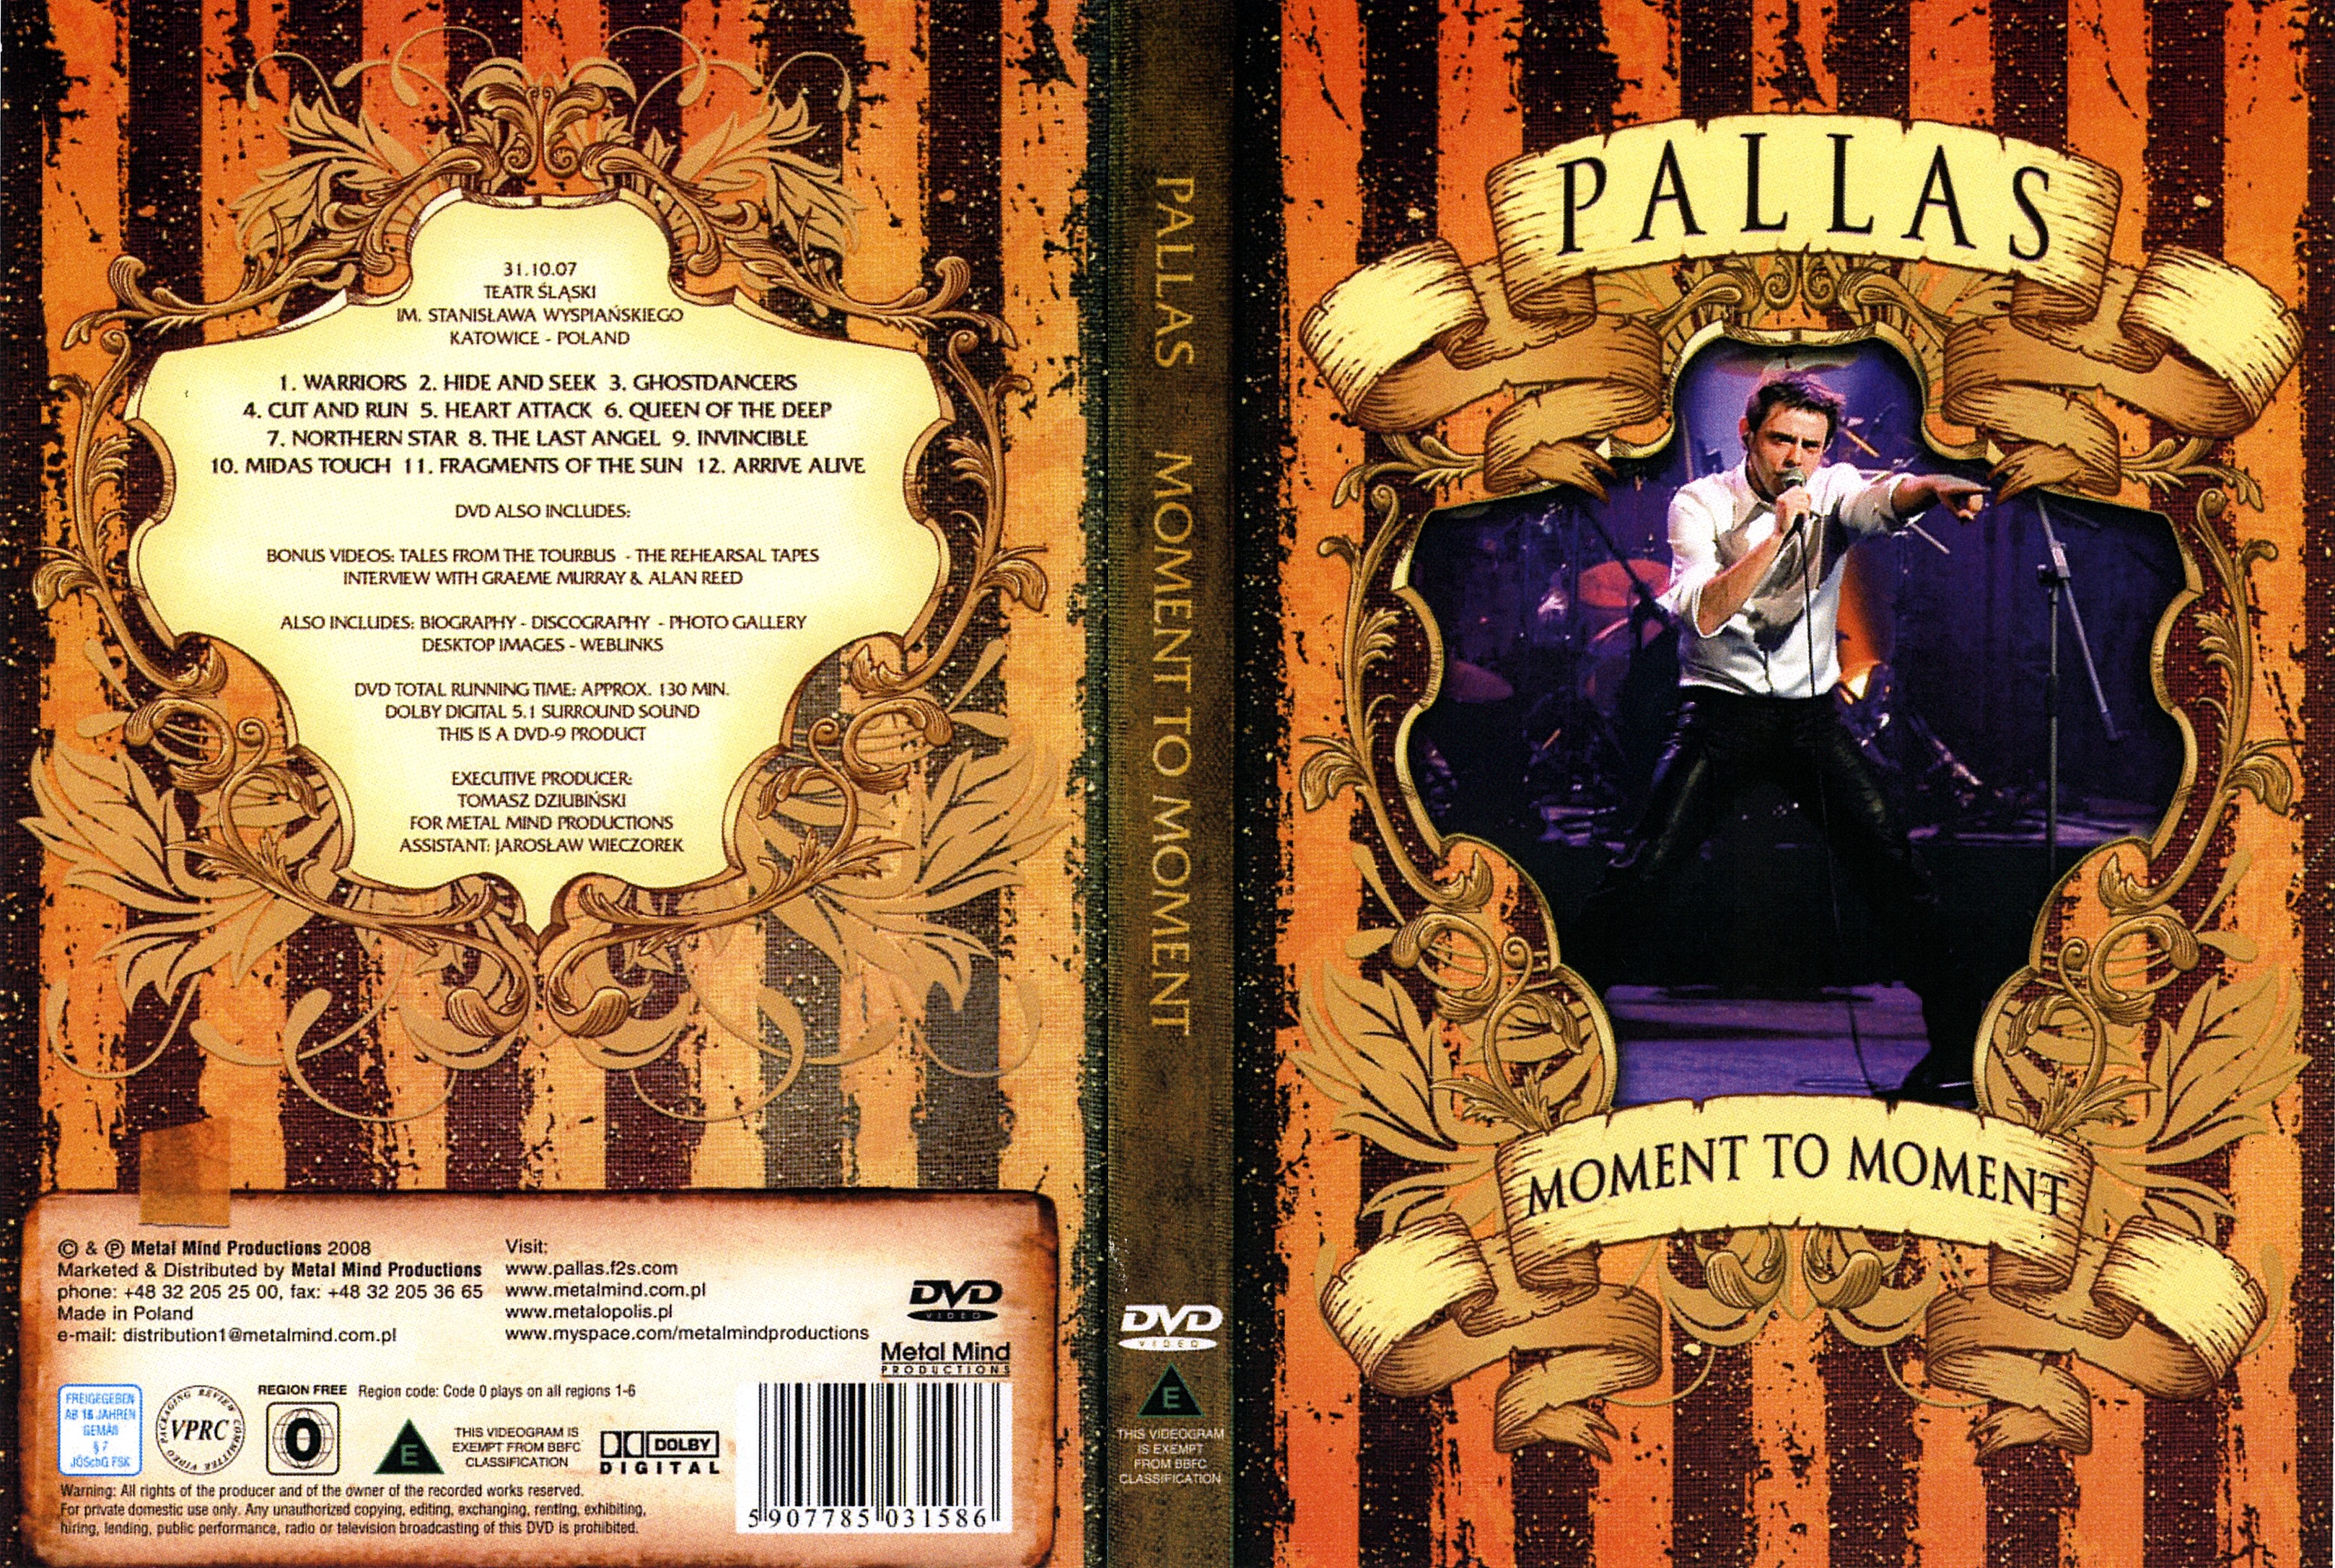 Jaquette DVD Pallas Moment to moment